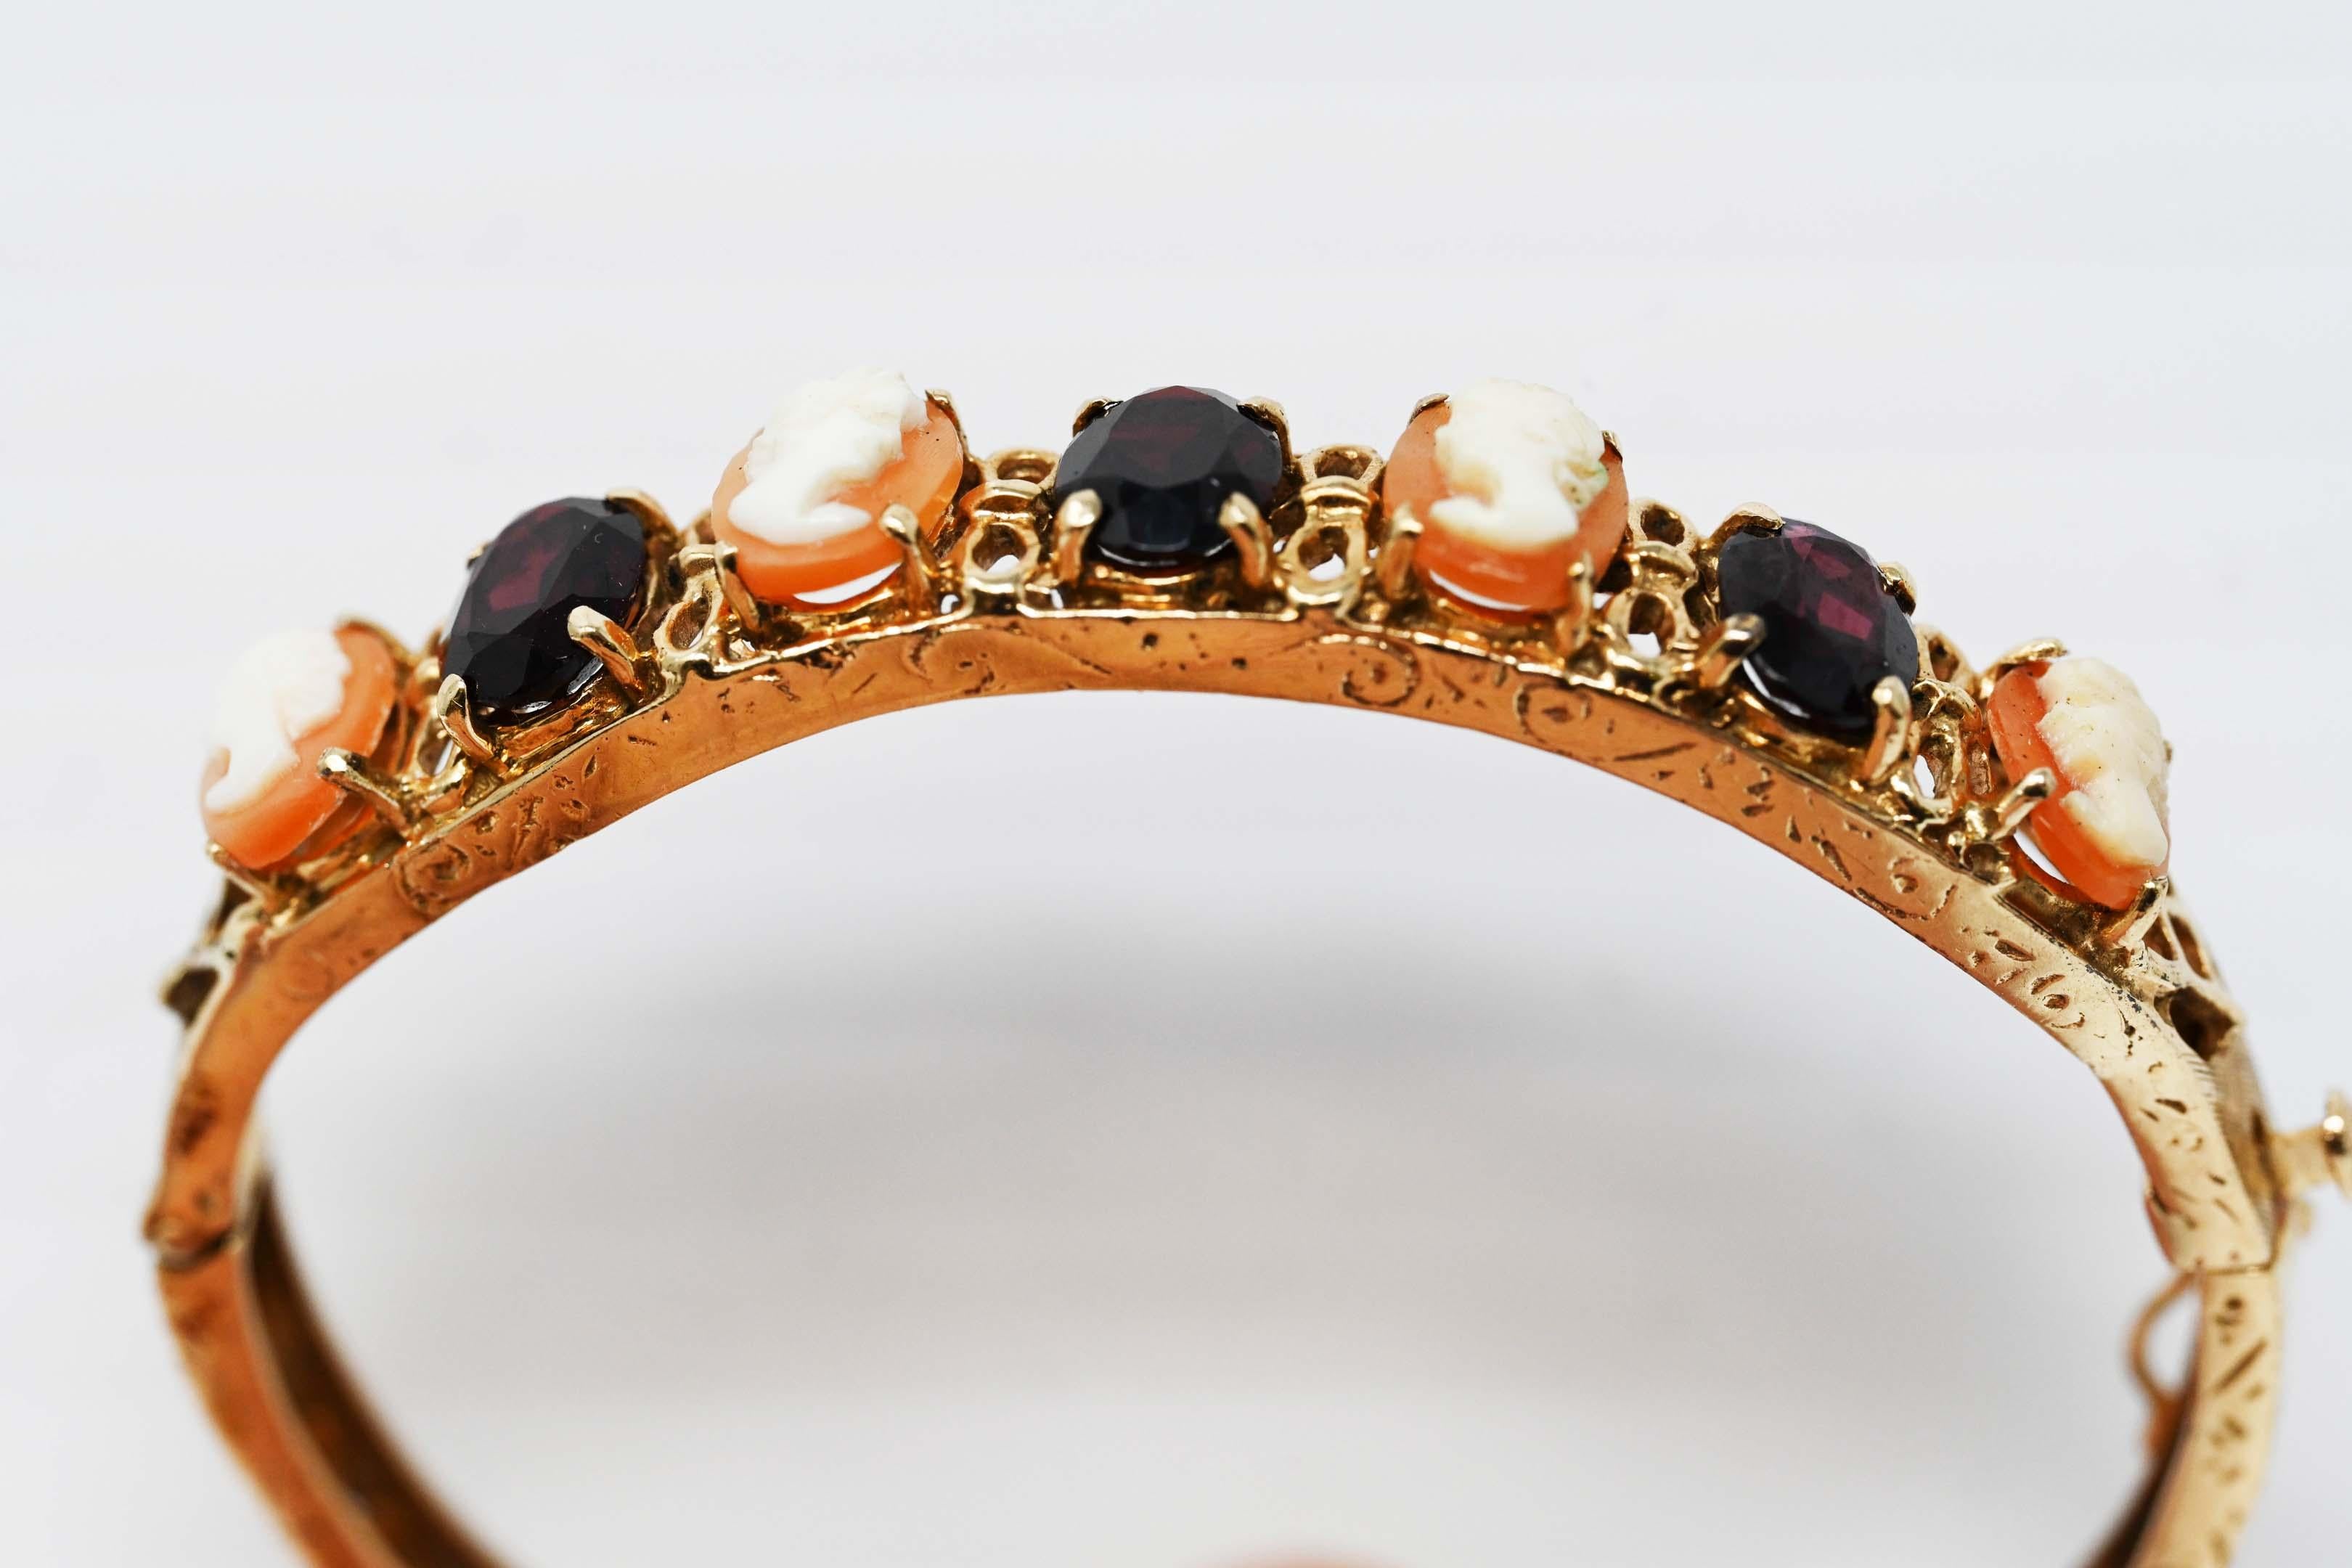 Vintage 14k gold bangle bracelet with three garnets and 4 carved cameo. Measures 1 3/4 inches x 2 1/16 inches in the interior. Stamped 14k and maker mark unknown. Weighs 14.9 grams.